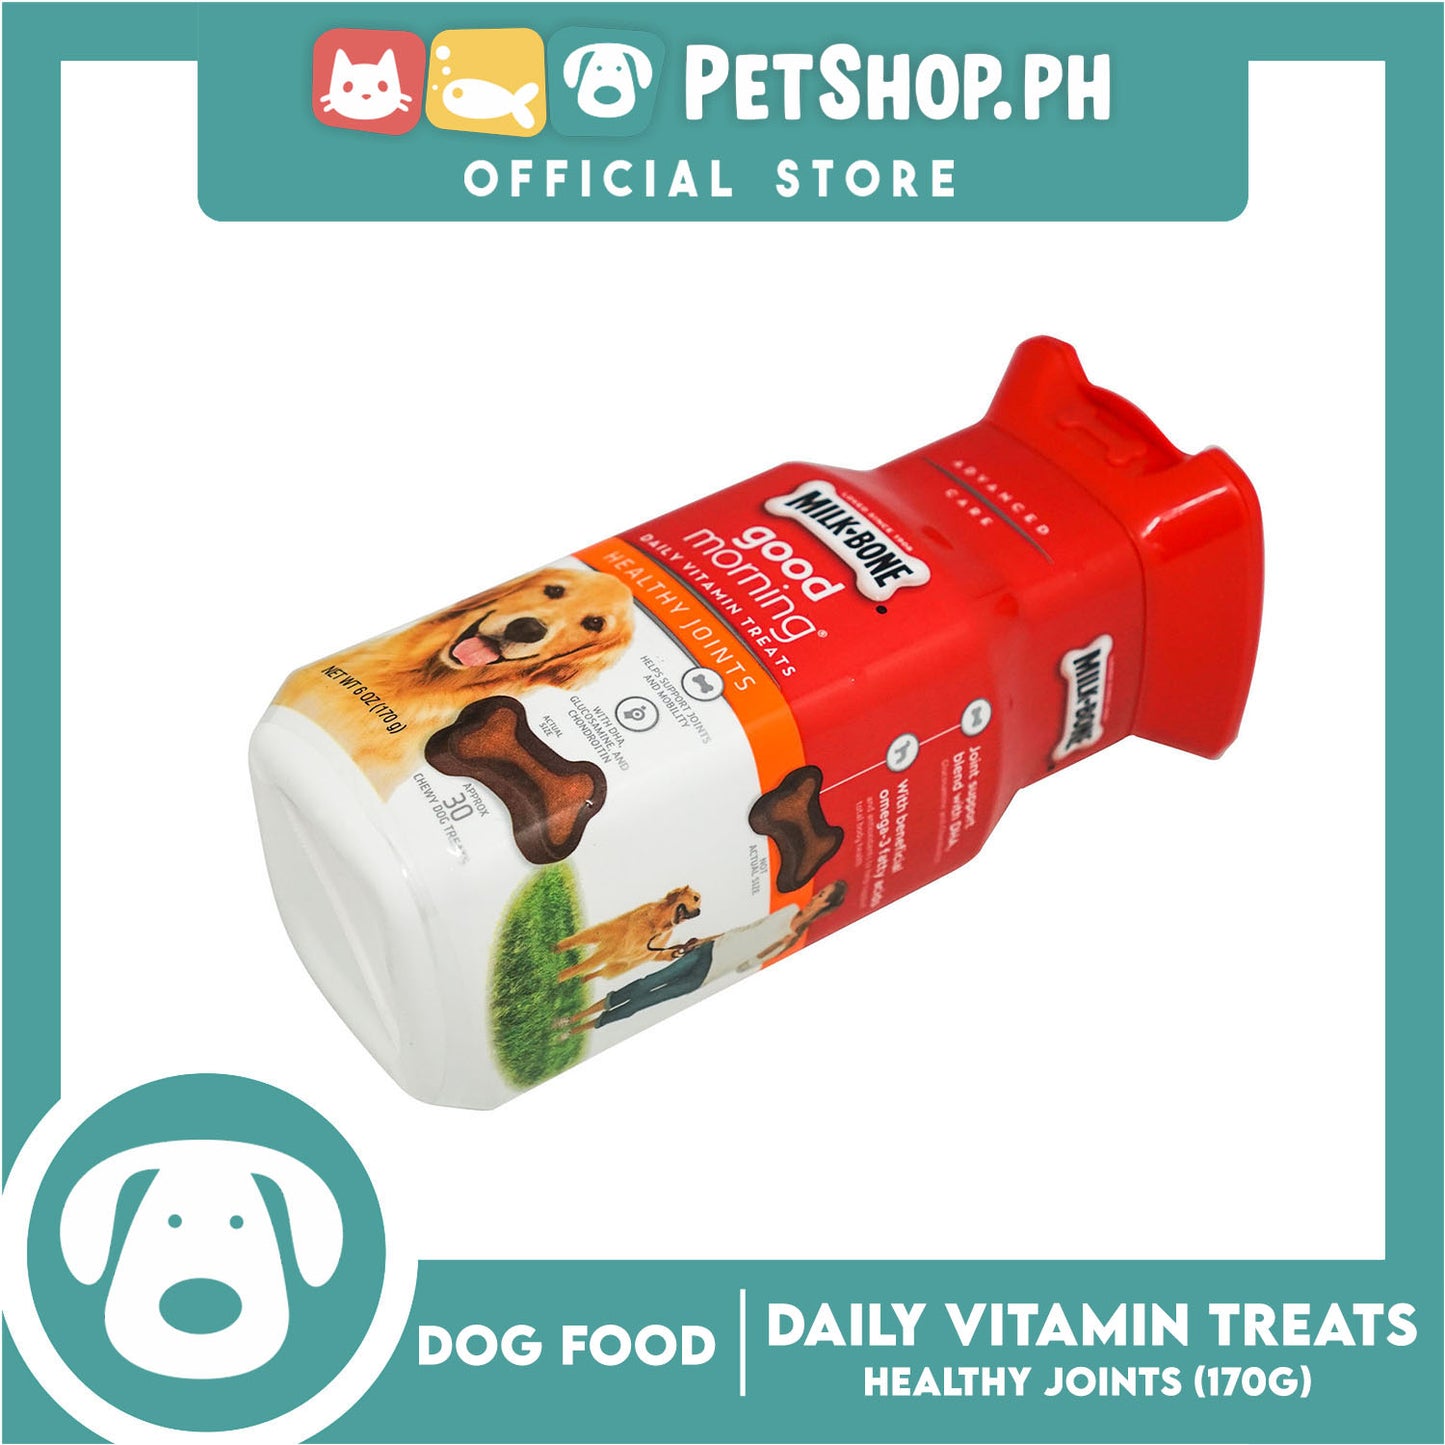 Milk-Bone Good Morning Healthy Joints Daily Vitamin Treats for Dogs 170g